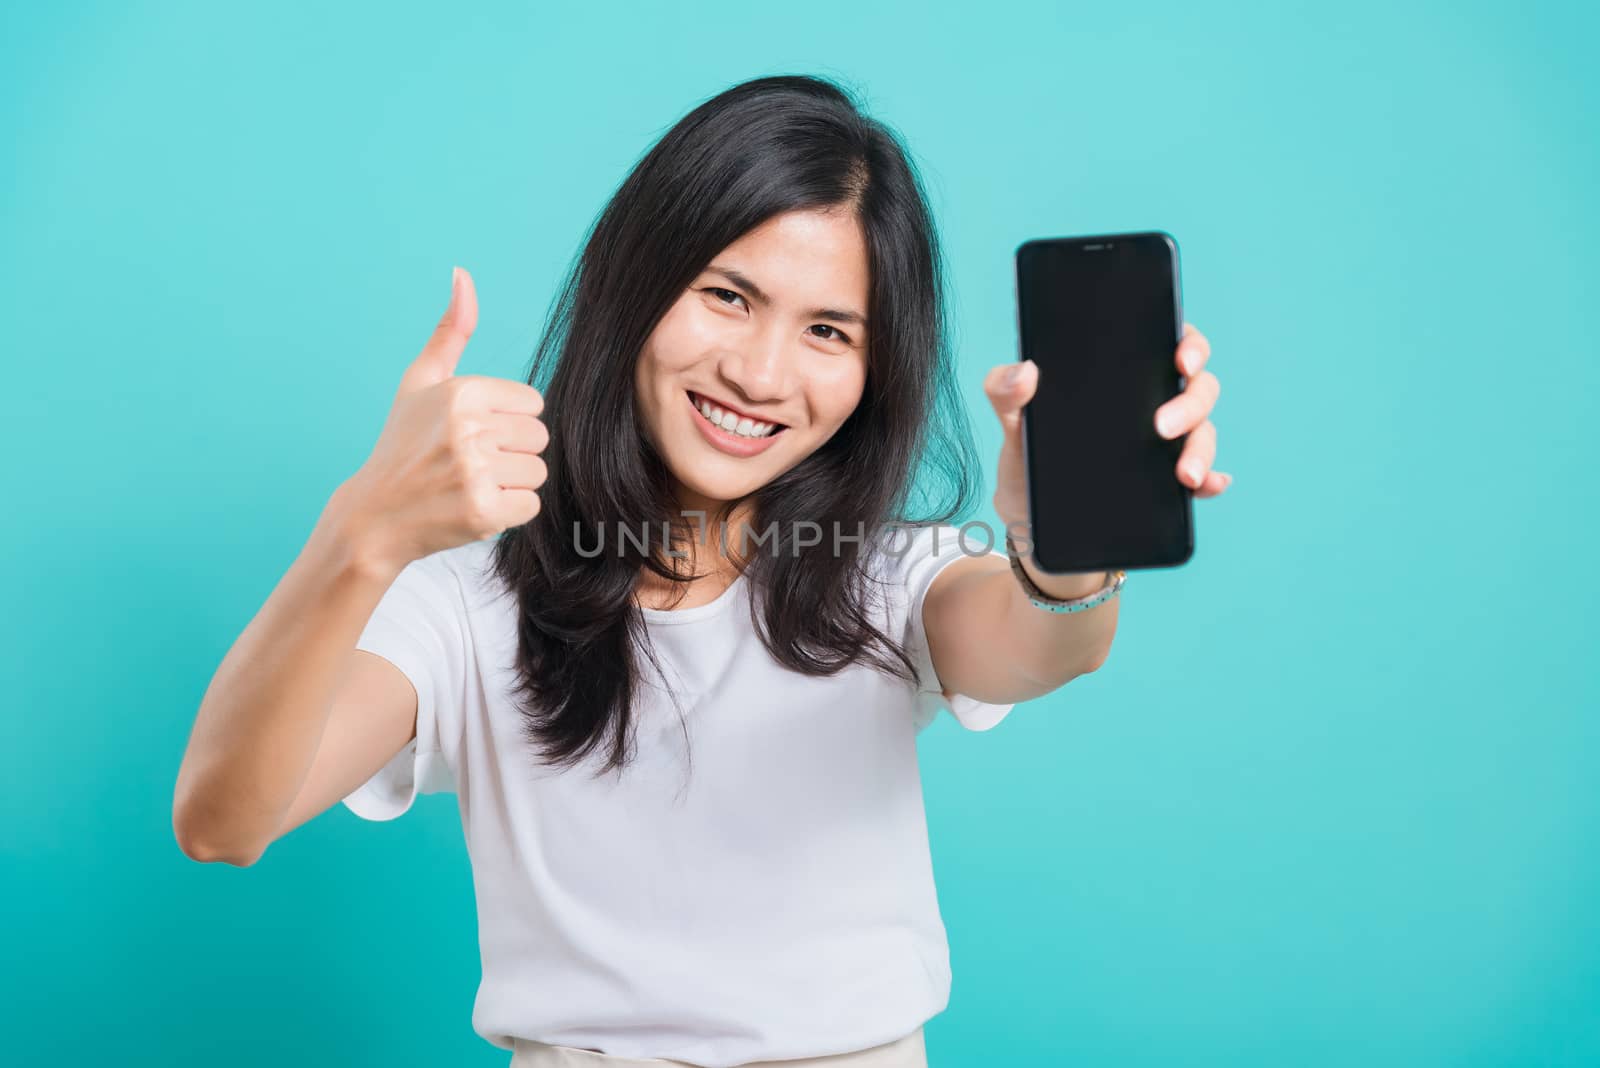 young woman standing smile, holding blank screen mobile phone by Sorapop